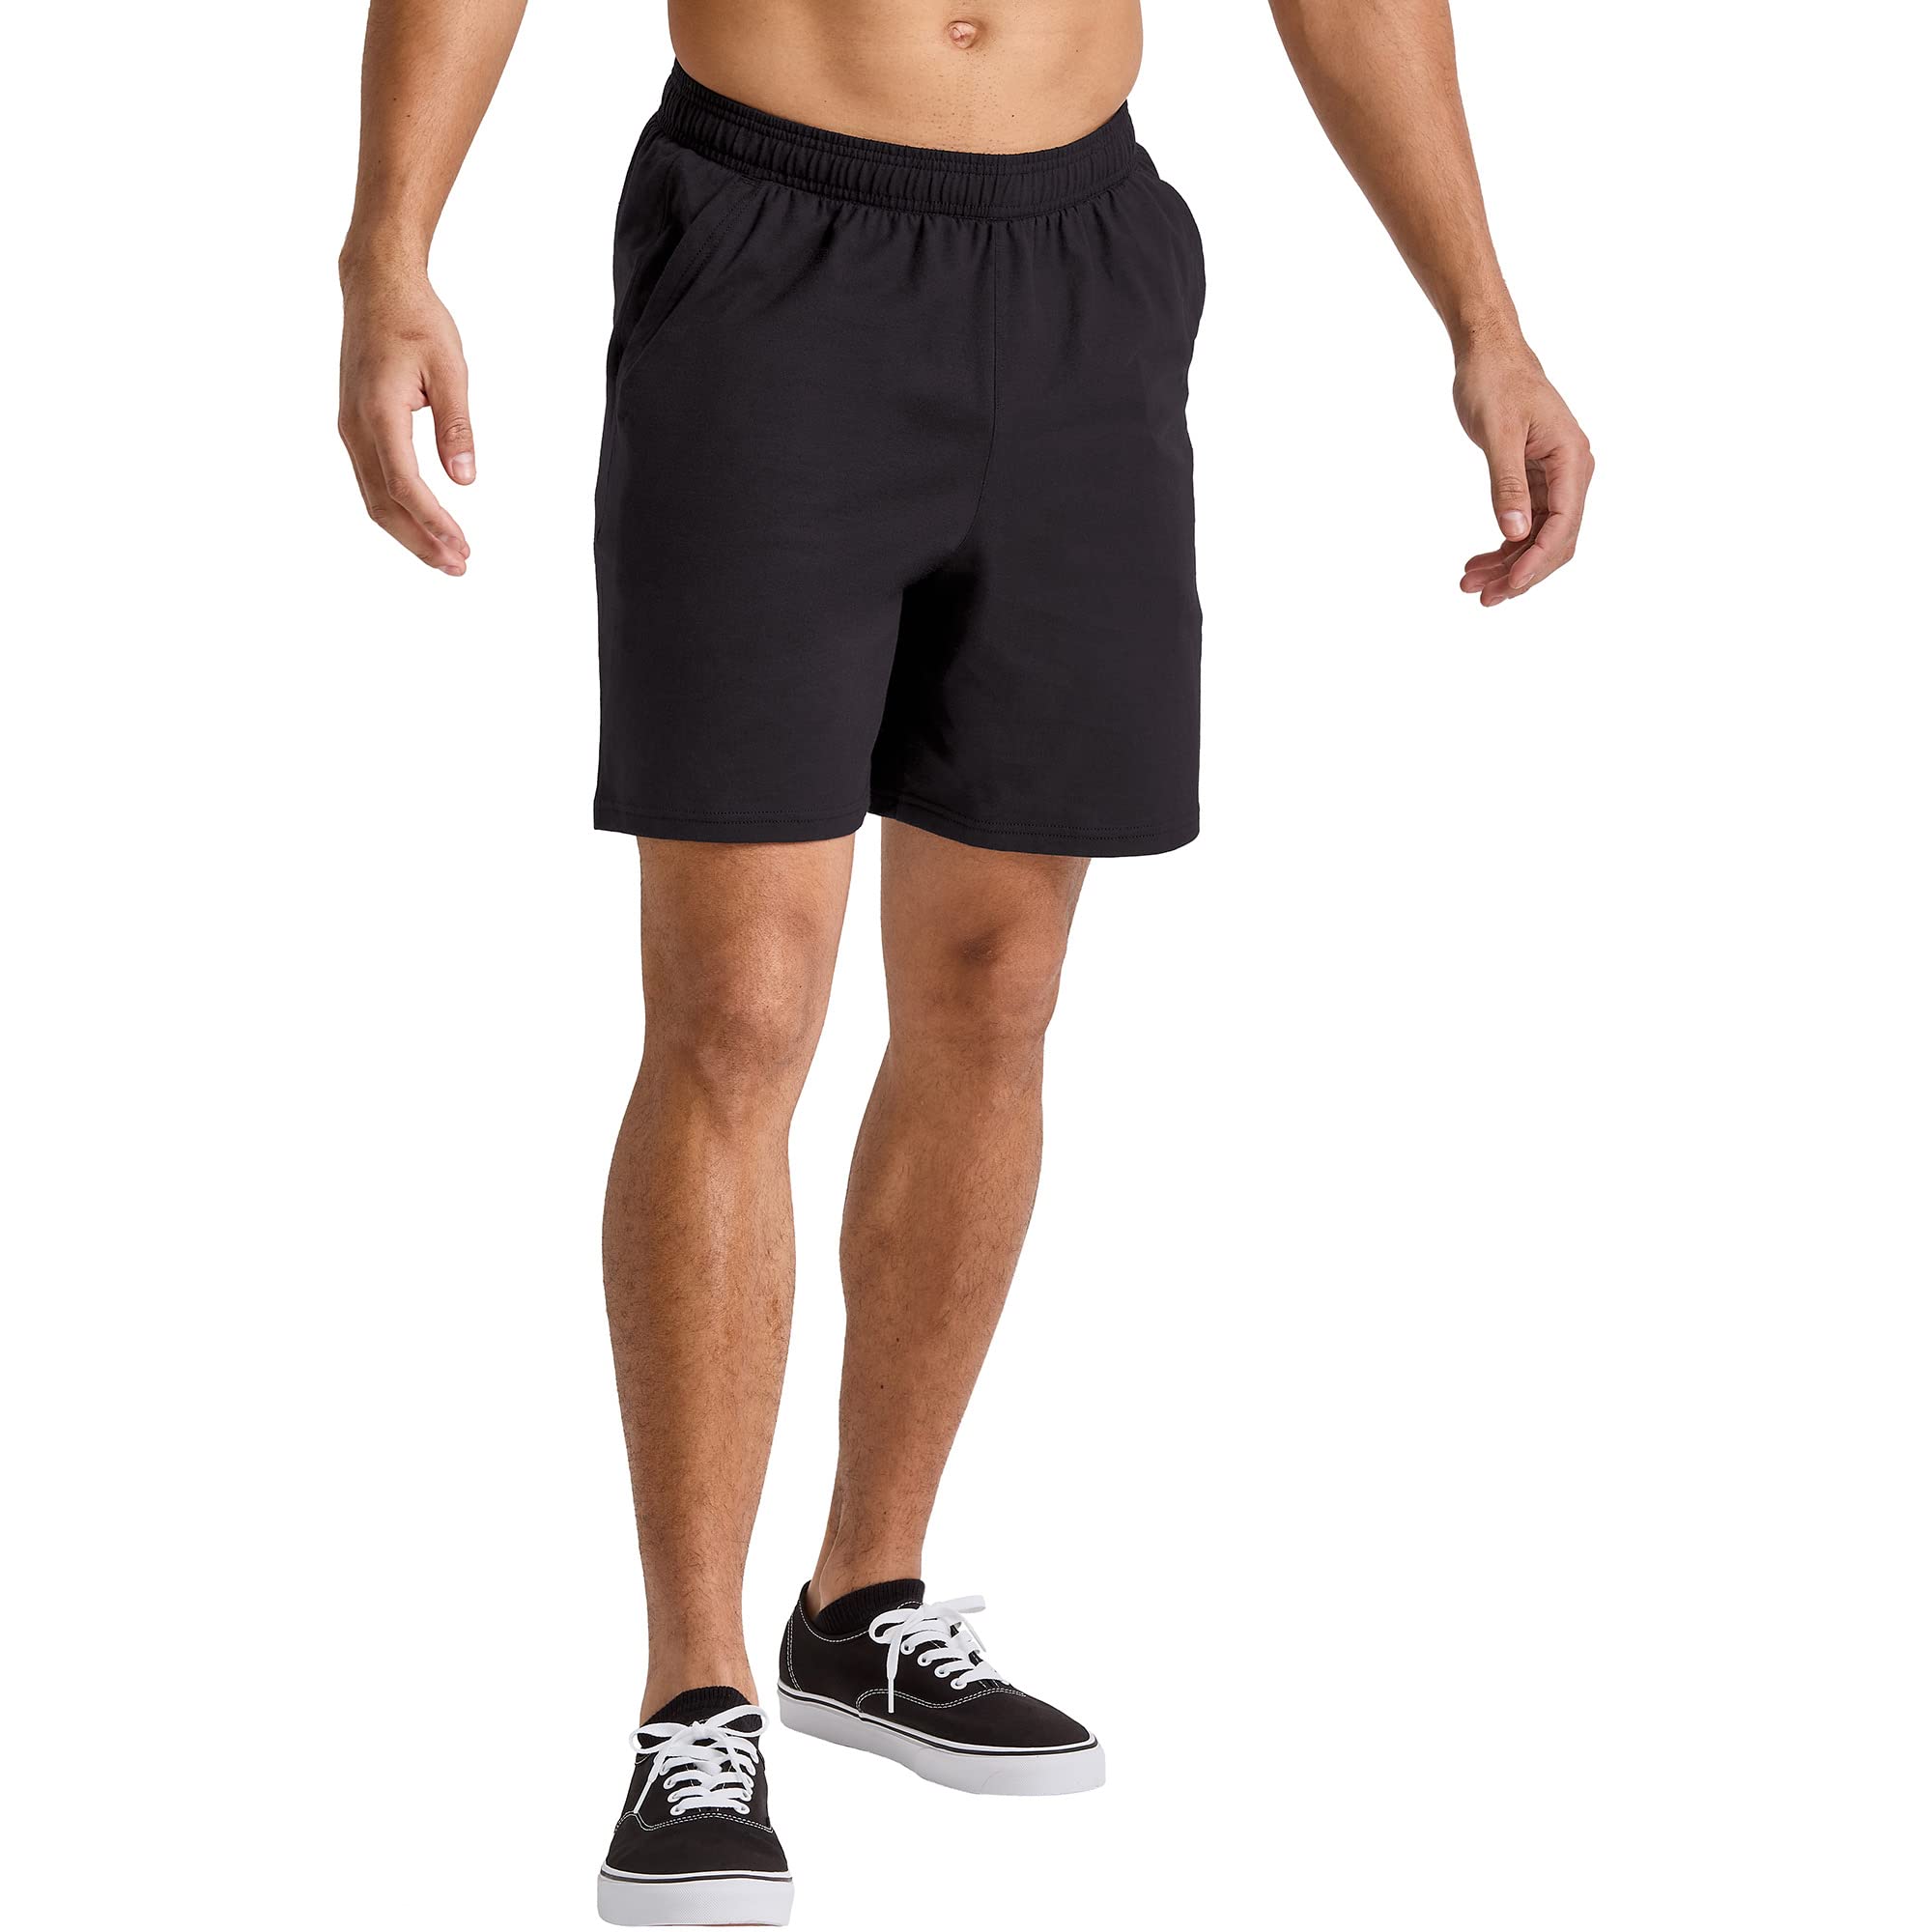 Hanes Men's Originals Cotton Pull-On Jersey Gym Shorts w/ Pockets (Black, 7" inseam) $8.40 + Free Shipping w/ Prime or on $35+